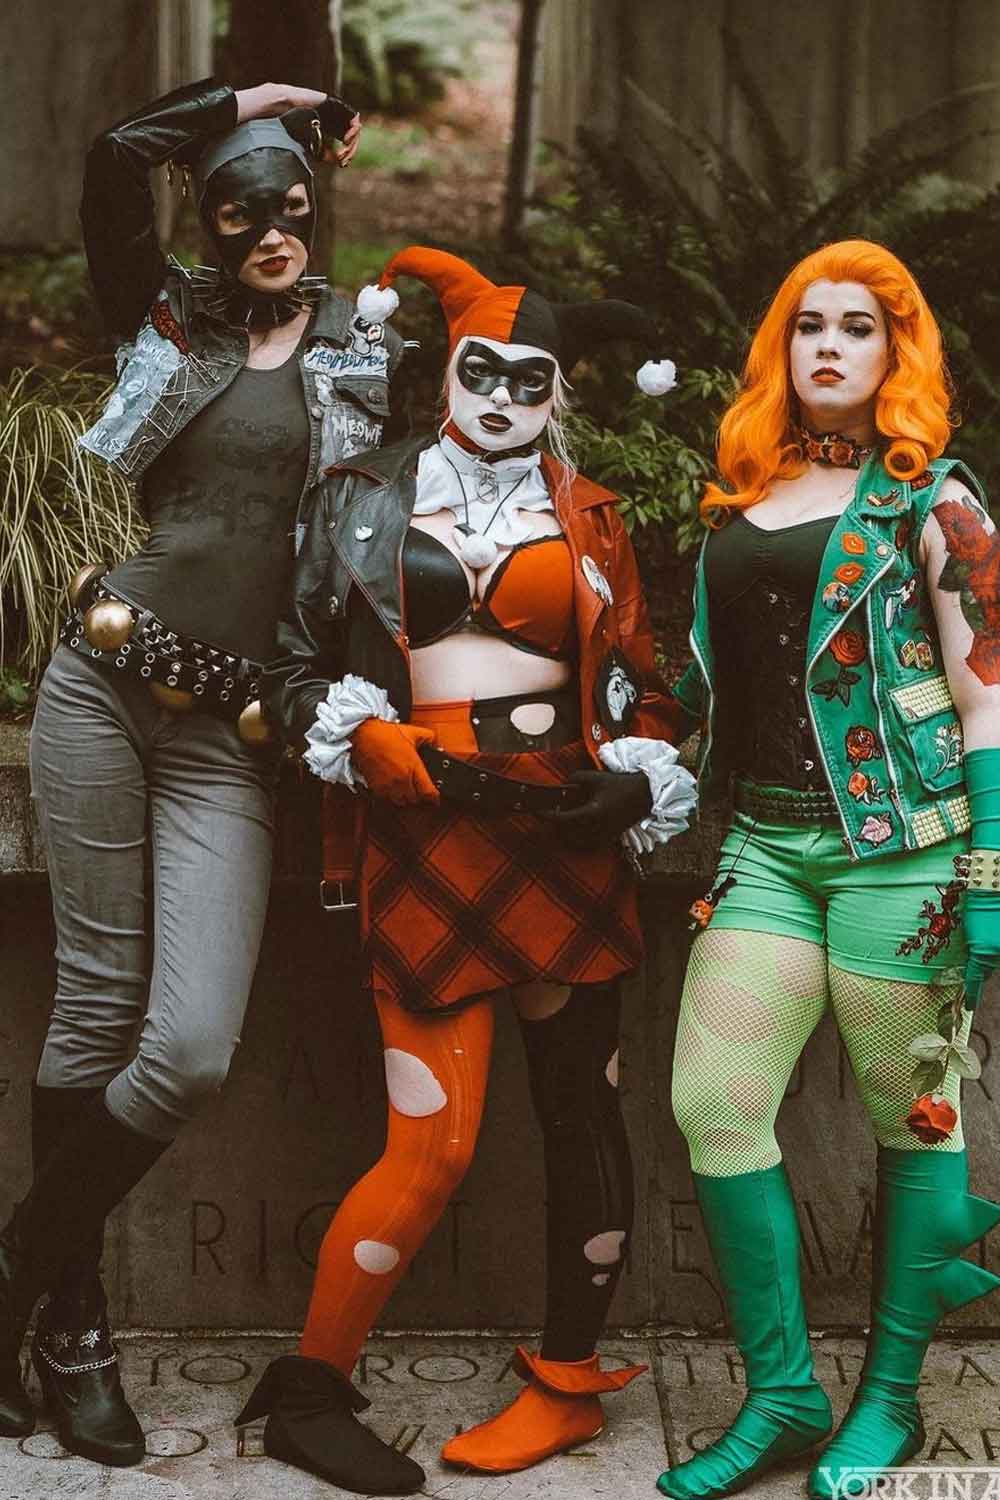 DC Comics Theme Halloween Costumes for Friends